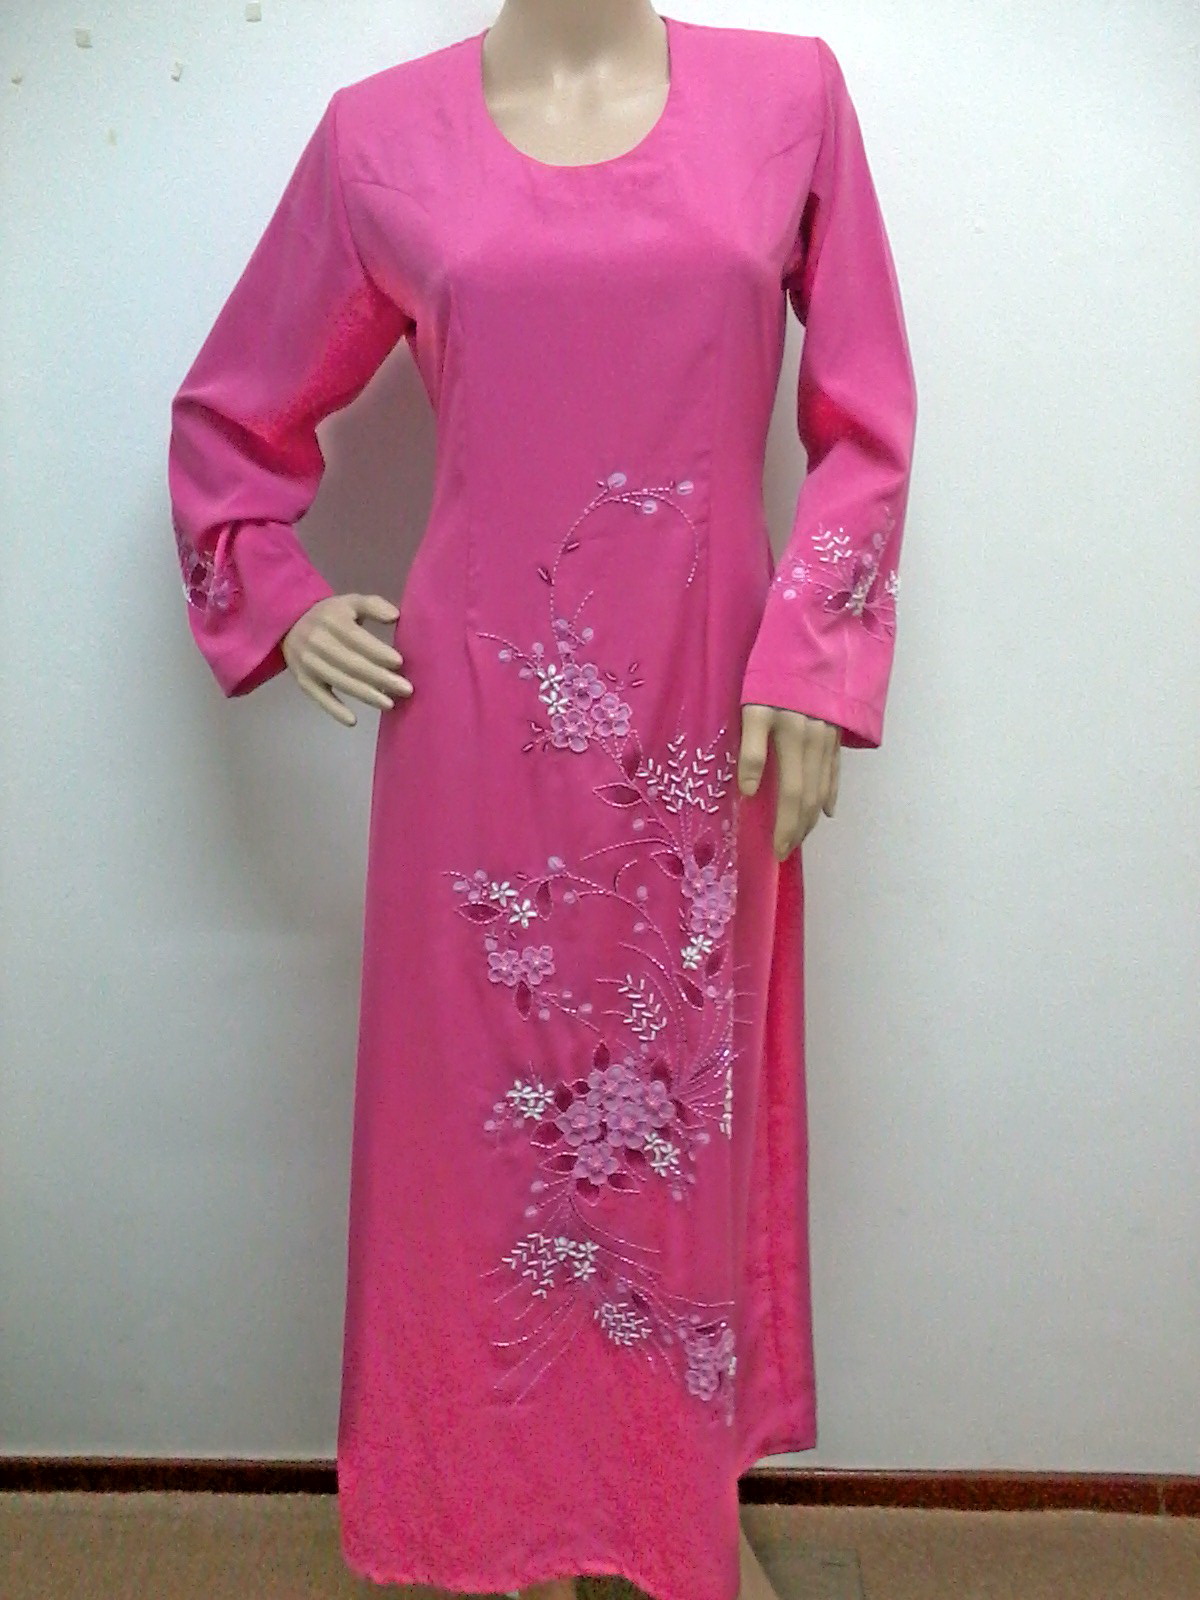 zannys: JUBAH MANIK / SULAM - RM89 ONLY